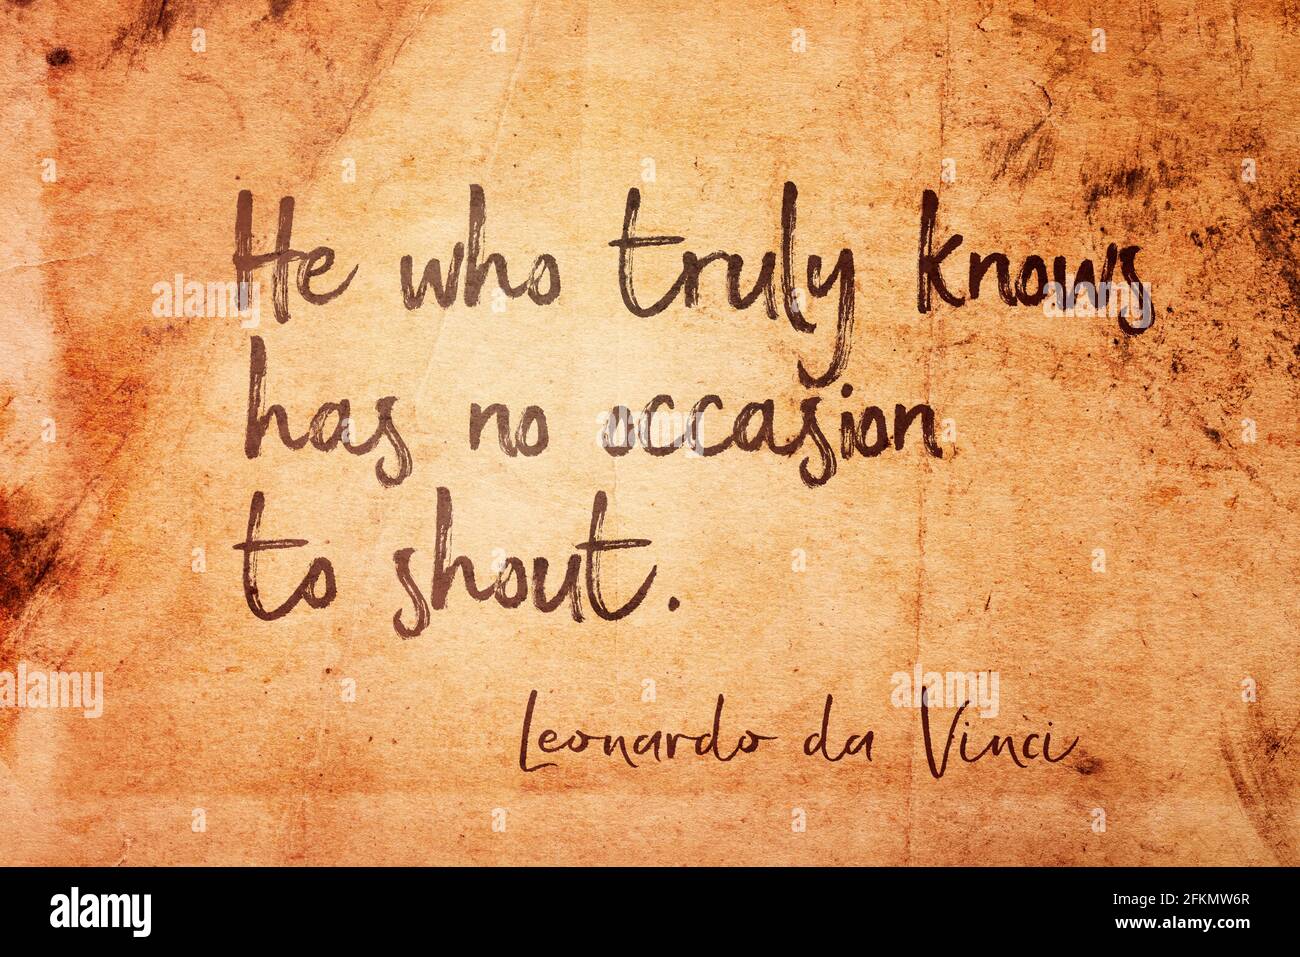 He who truly knows has no occasion to shout - ancient Italian artist Leonardo da Vinci quote printed on vintage grunge paper Stock Photo